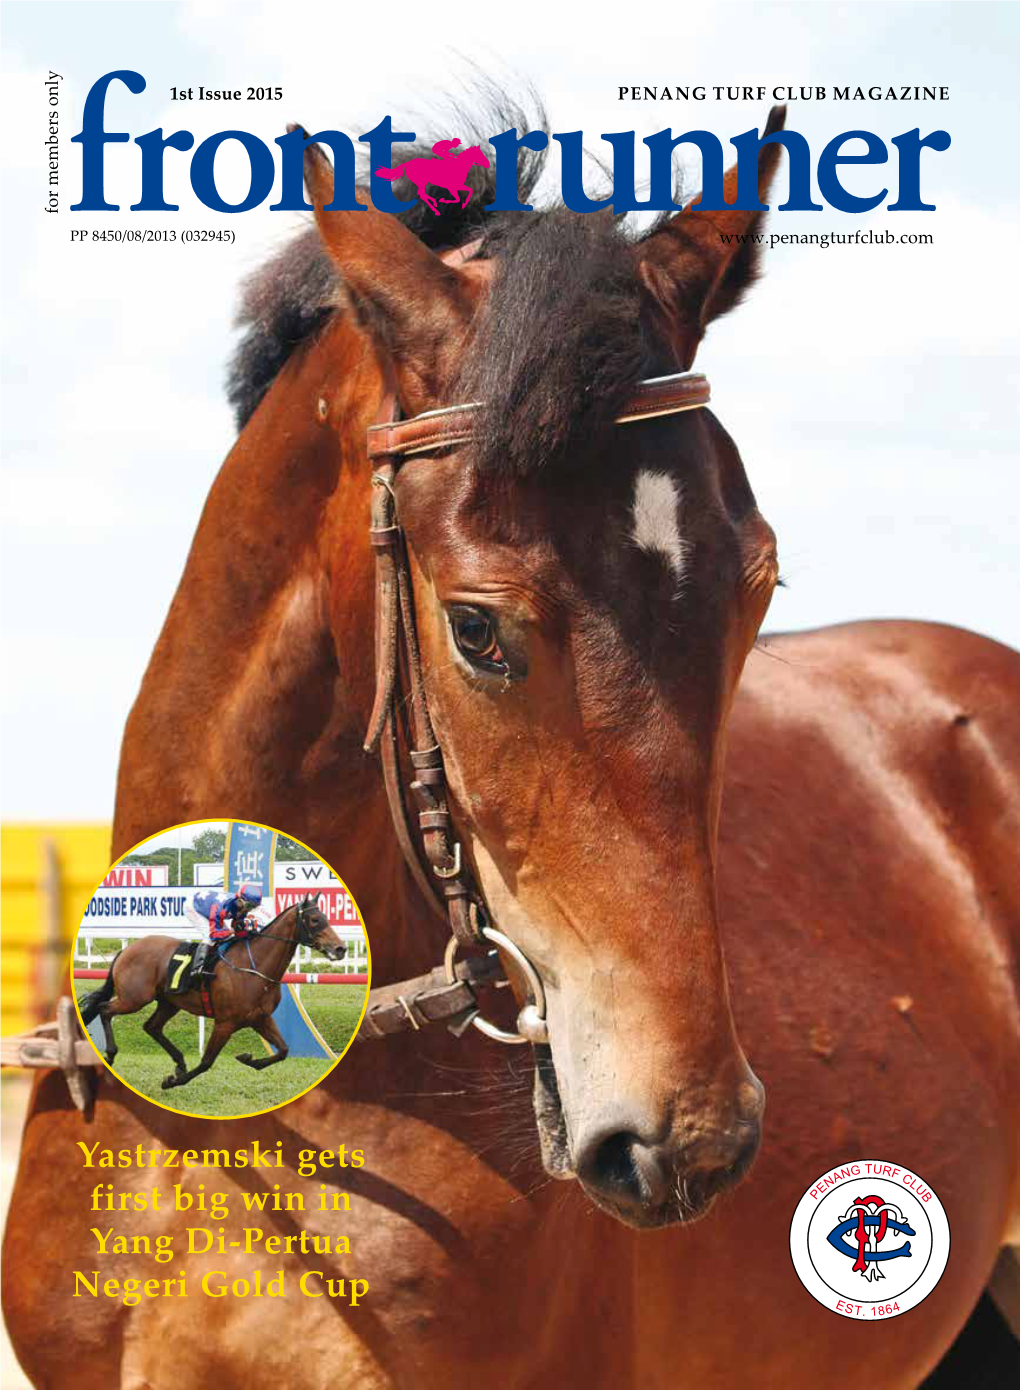 1St Issue 2015 Penang Turf Club Magazine for Members Only PP 8450/08/2013 (032945)